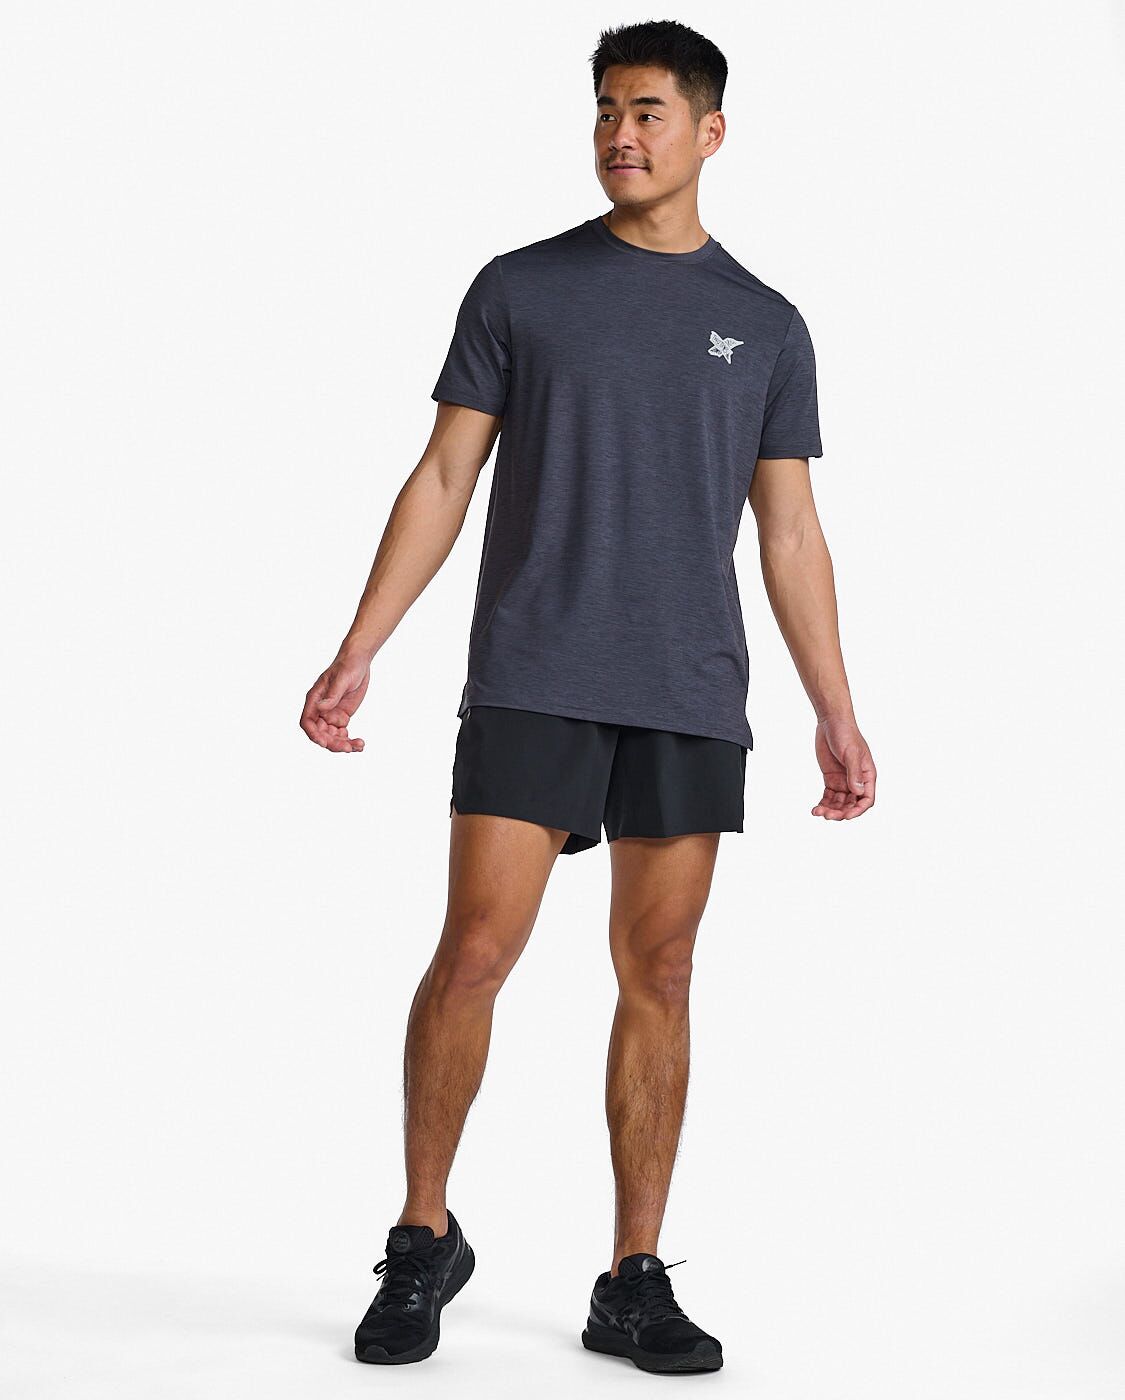 2XU South Africa - Mens Motion Graphic Tee - IDK/BLK